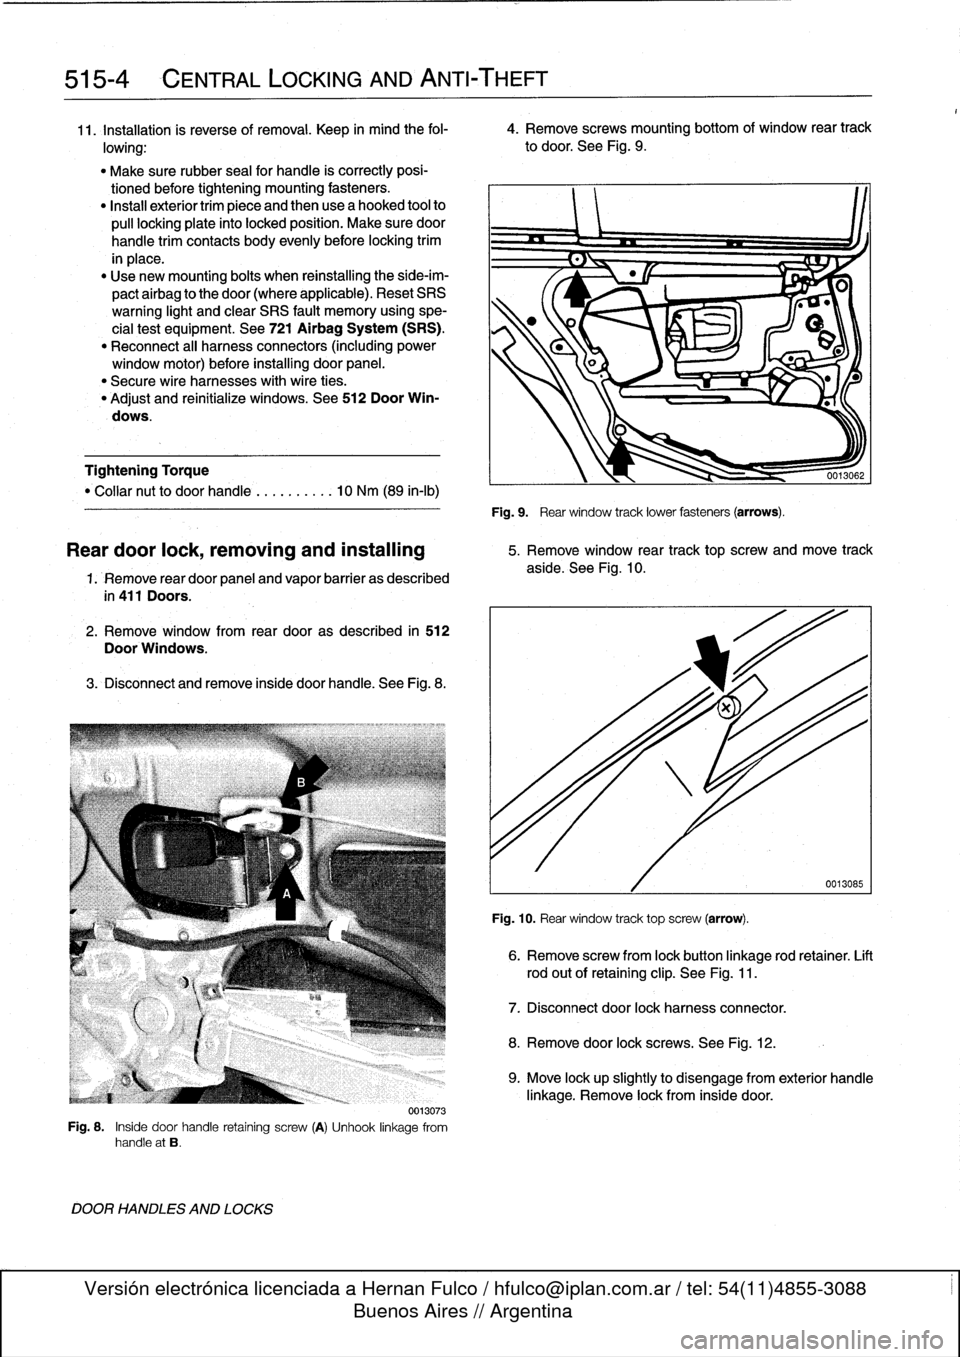 BMW 325i 1994 E36 Owners Manual 
515-4

	

CENTRAL
LOCKING
AND
ANTI-THEFT

11
.
Installation
is
reverse
of
removal
.
Keep
in
mind
the
fol-

	

4
.
Remove
screws
mounting
bottom
of
window
rear
track

lowing
:

	

to
door
.
See
Fig
.
